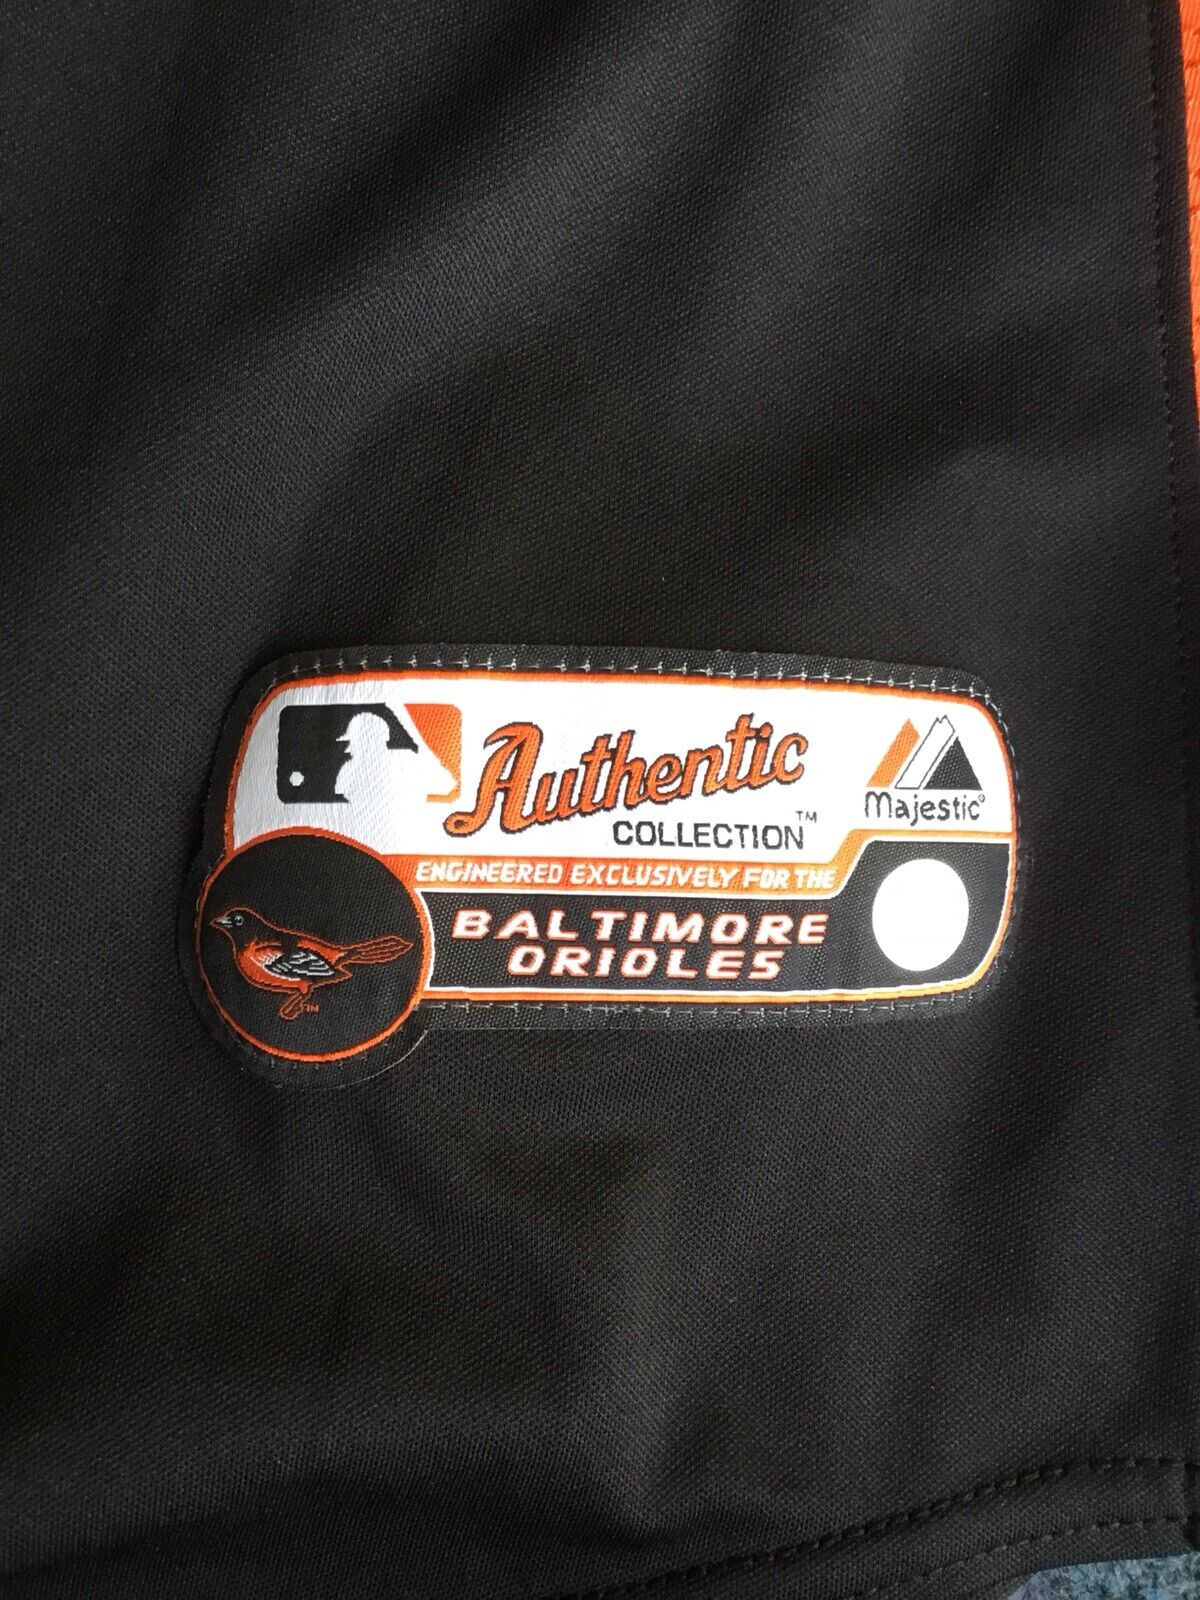 Baltimore Orioles Authentic Black Jersey Majestic New W/O Tags Size 48 Signed